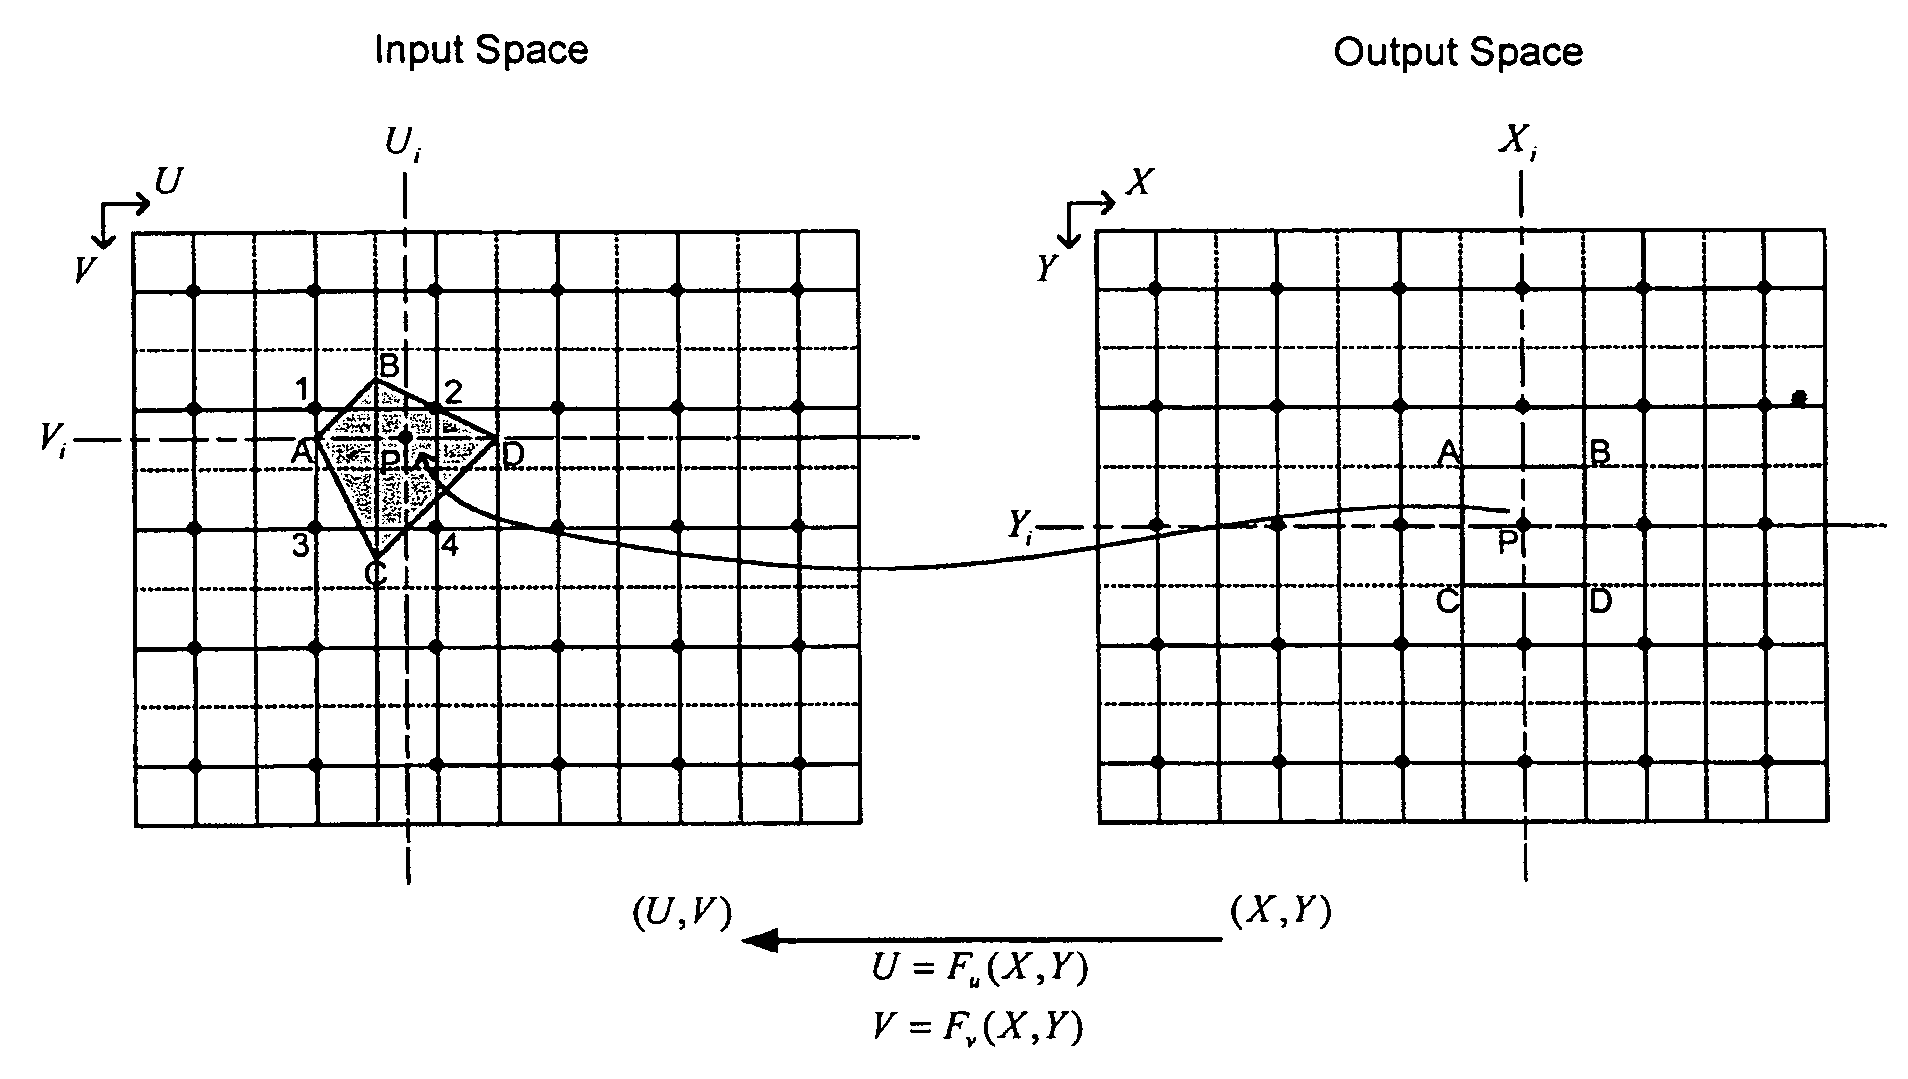 System and method for representing a general two dimensional spatial transformation